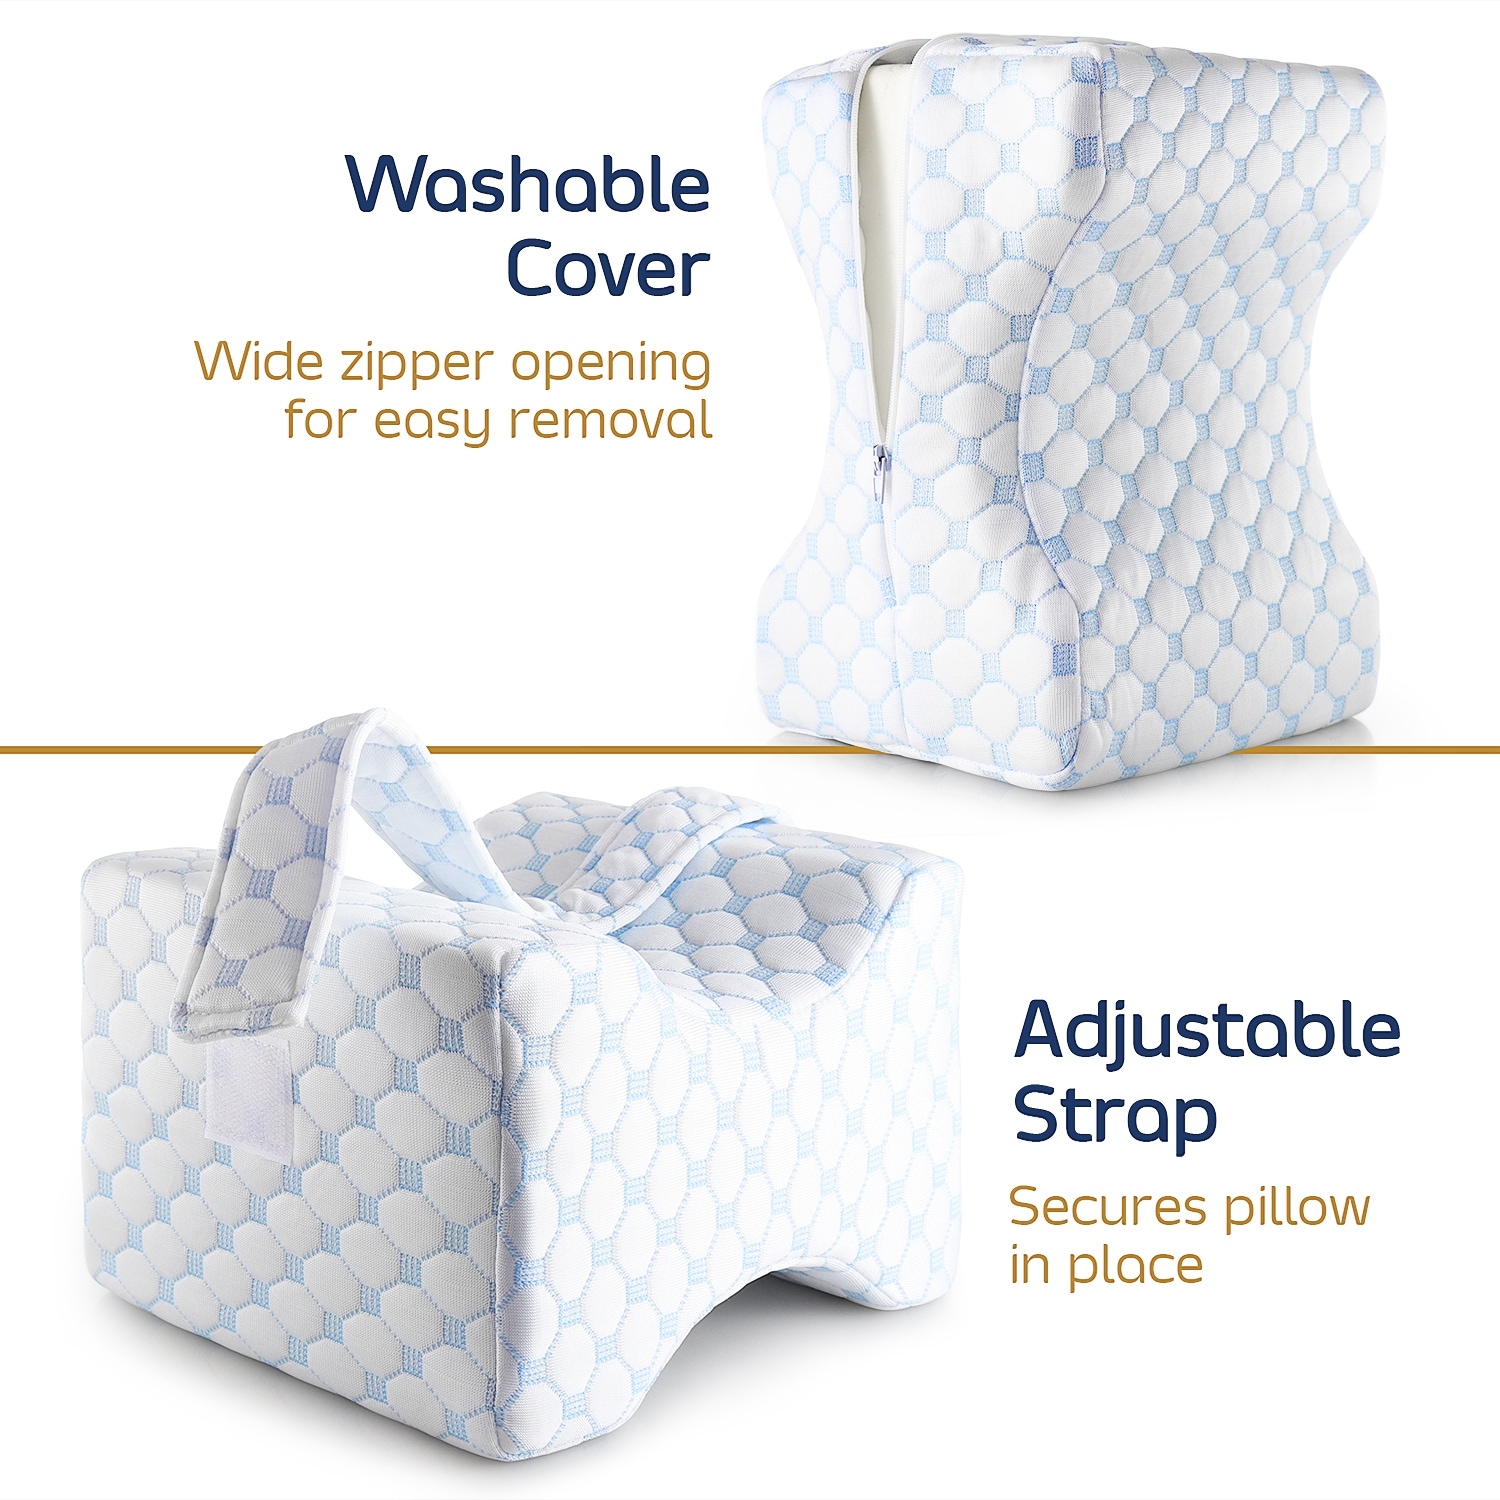 https://ak1.ostkcdn.com/images/products/is/images/direct/25e070ff3c96099ee85ece6fa3b3db9b8d12c4b9/Nestl-Knee-Pillow-with-Cooling-Cover-and-Adjustable-Strap.jpg